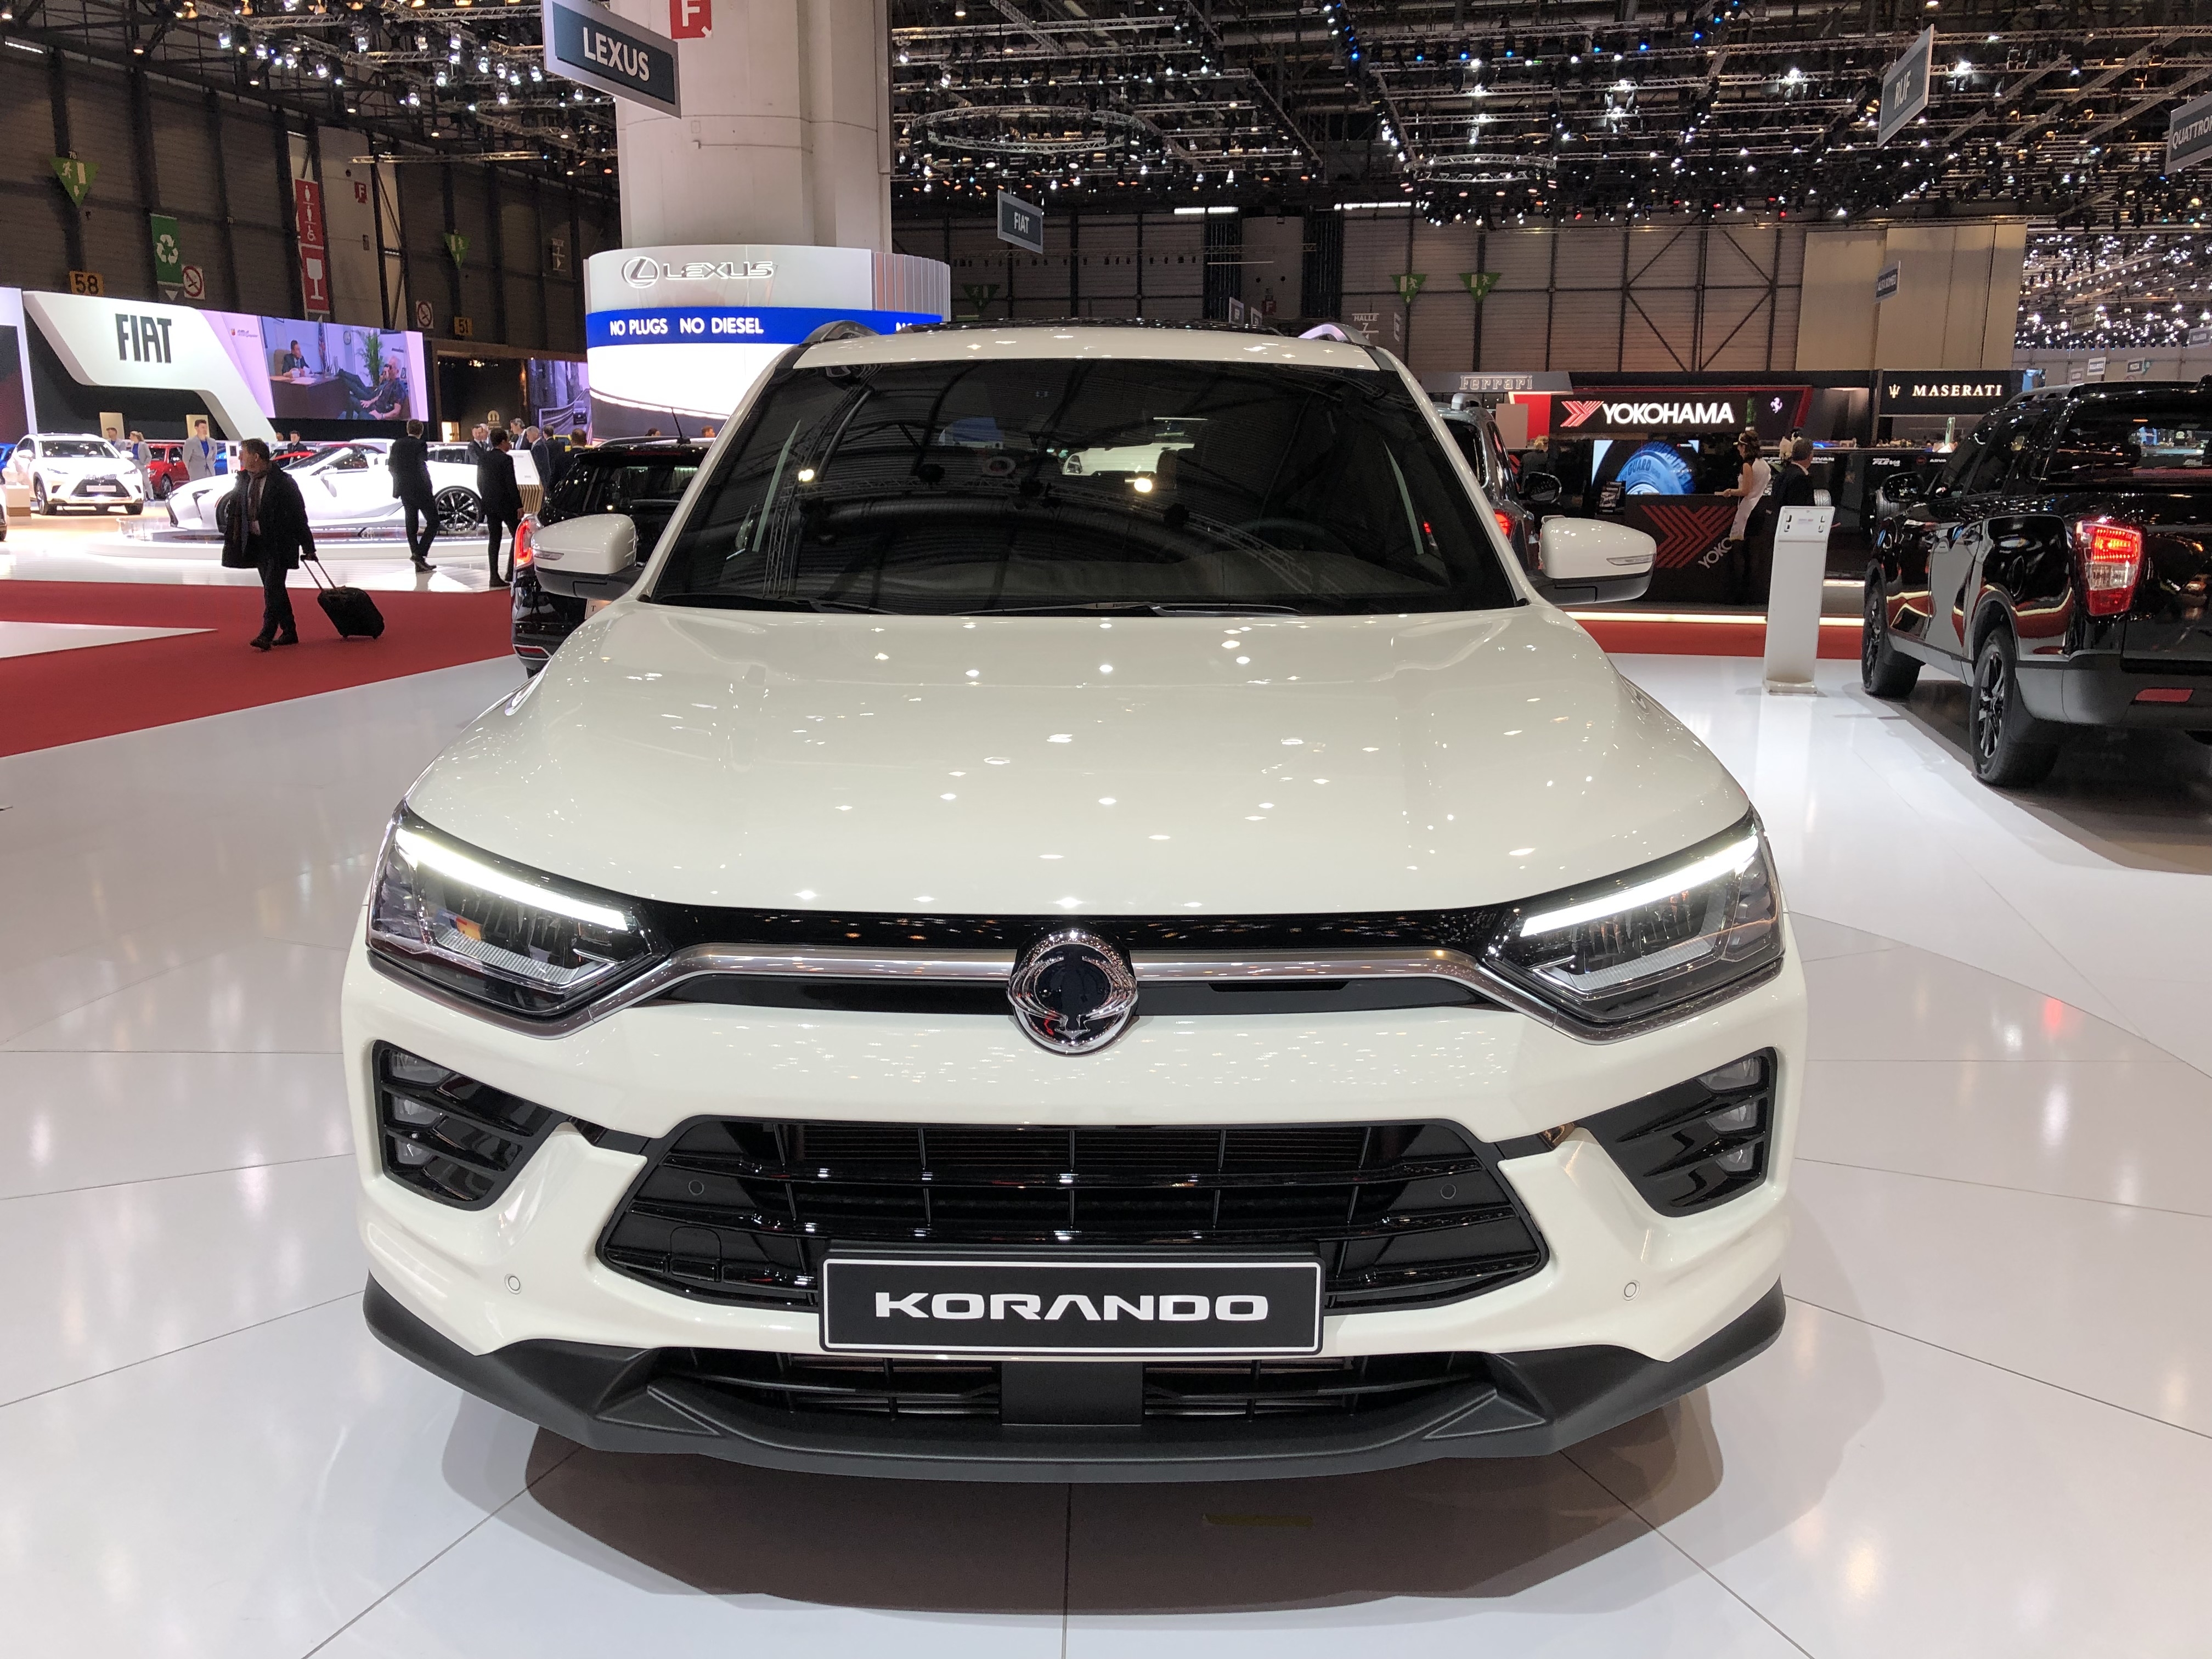 SsangYong Korando hd specifications